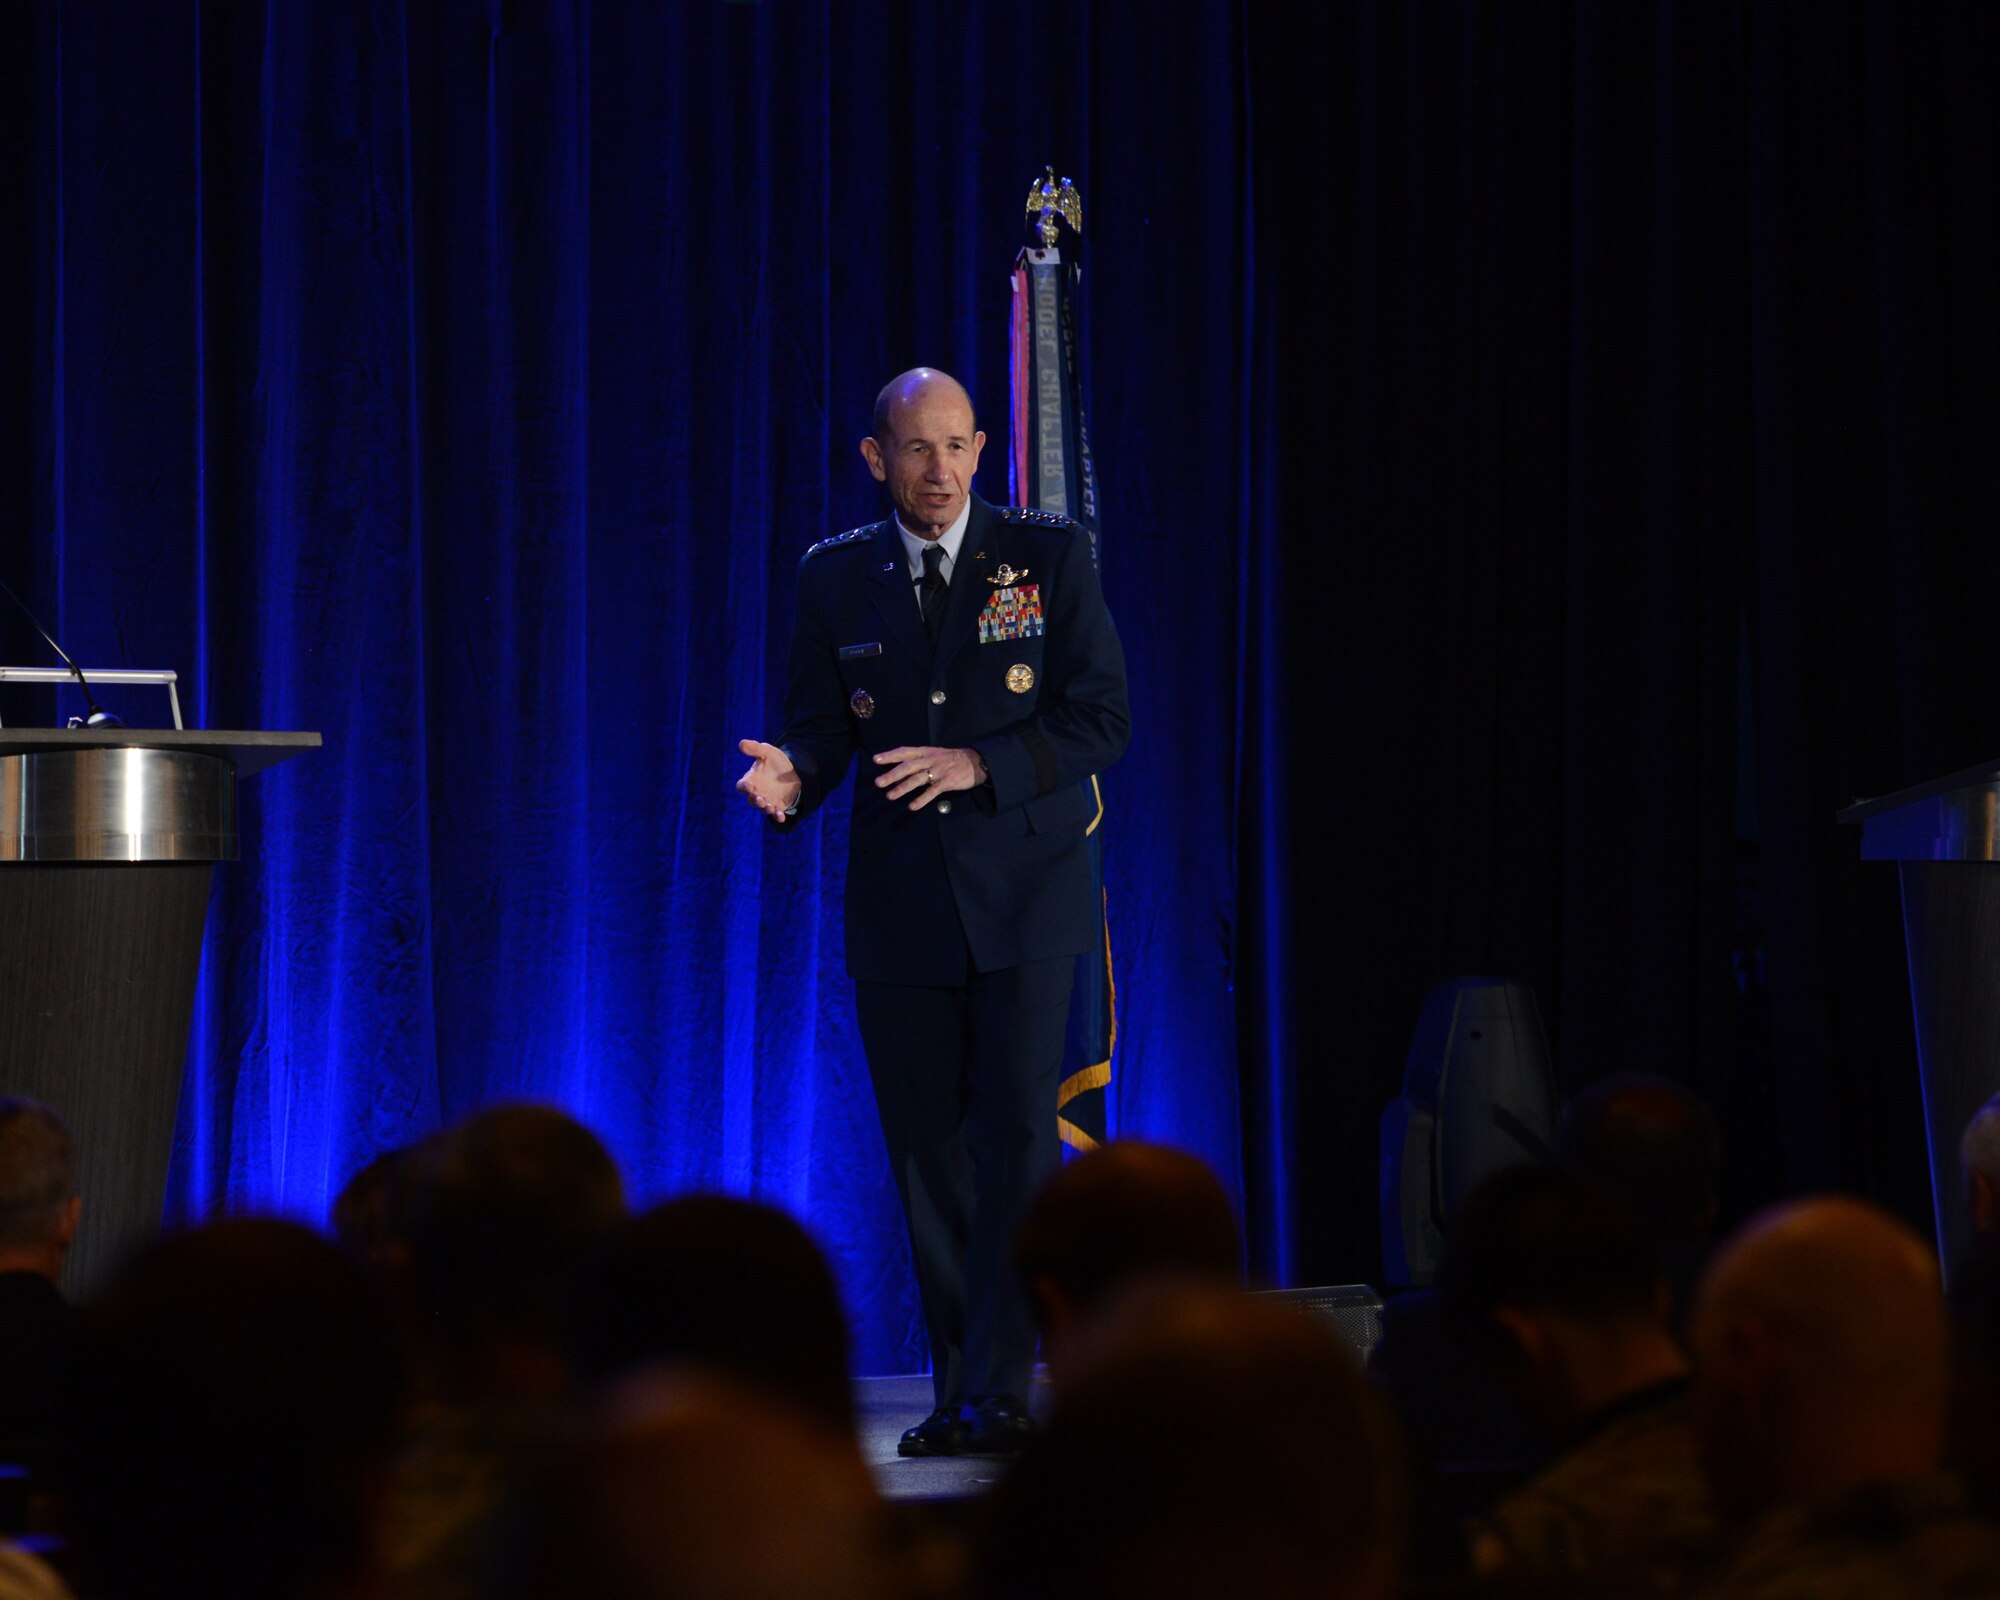 U.S. Air Force Gen. Mike Holmes, commander of Air Combat Command, speaks to Alamo Armed Forces Communication and Engineering Association Chapter Event attendees in San Antonio, Texas, Nov. 20, 2019. During the annual cyber- and technology-focused conference, Holmes discussed the importance of continuously evolving the U.S. military’s multi-domain warfighter to combat tomorrow’s threats. (U.S. Air Force photo by Sharon Singleton)